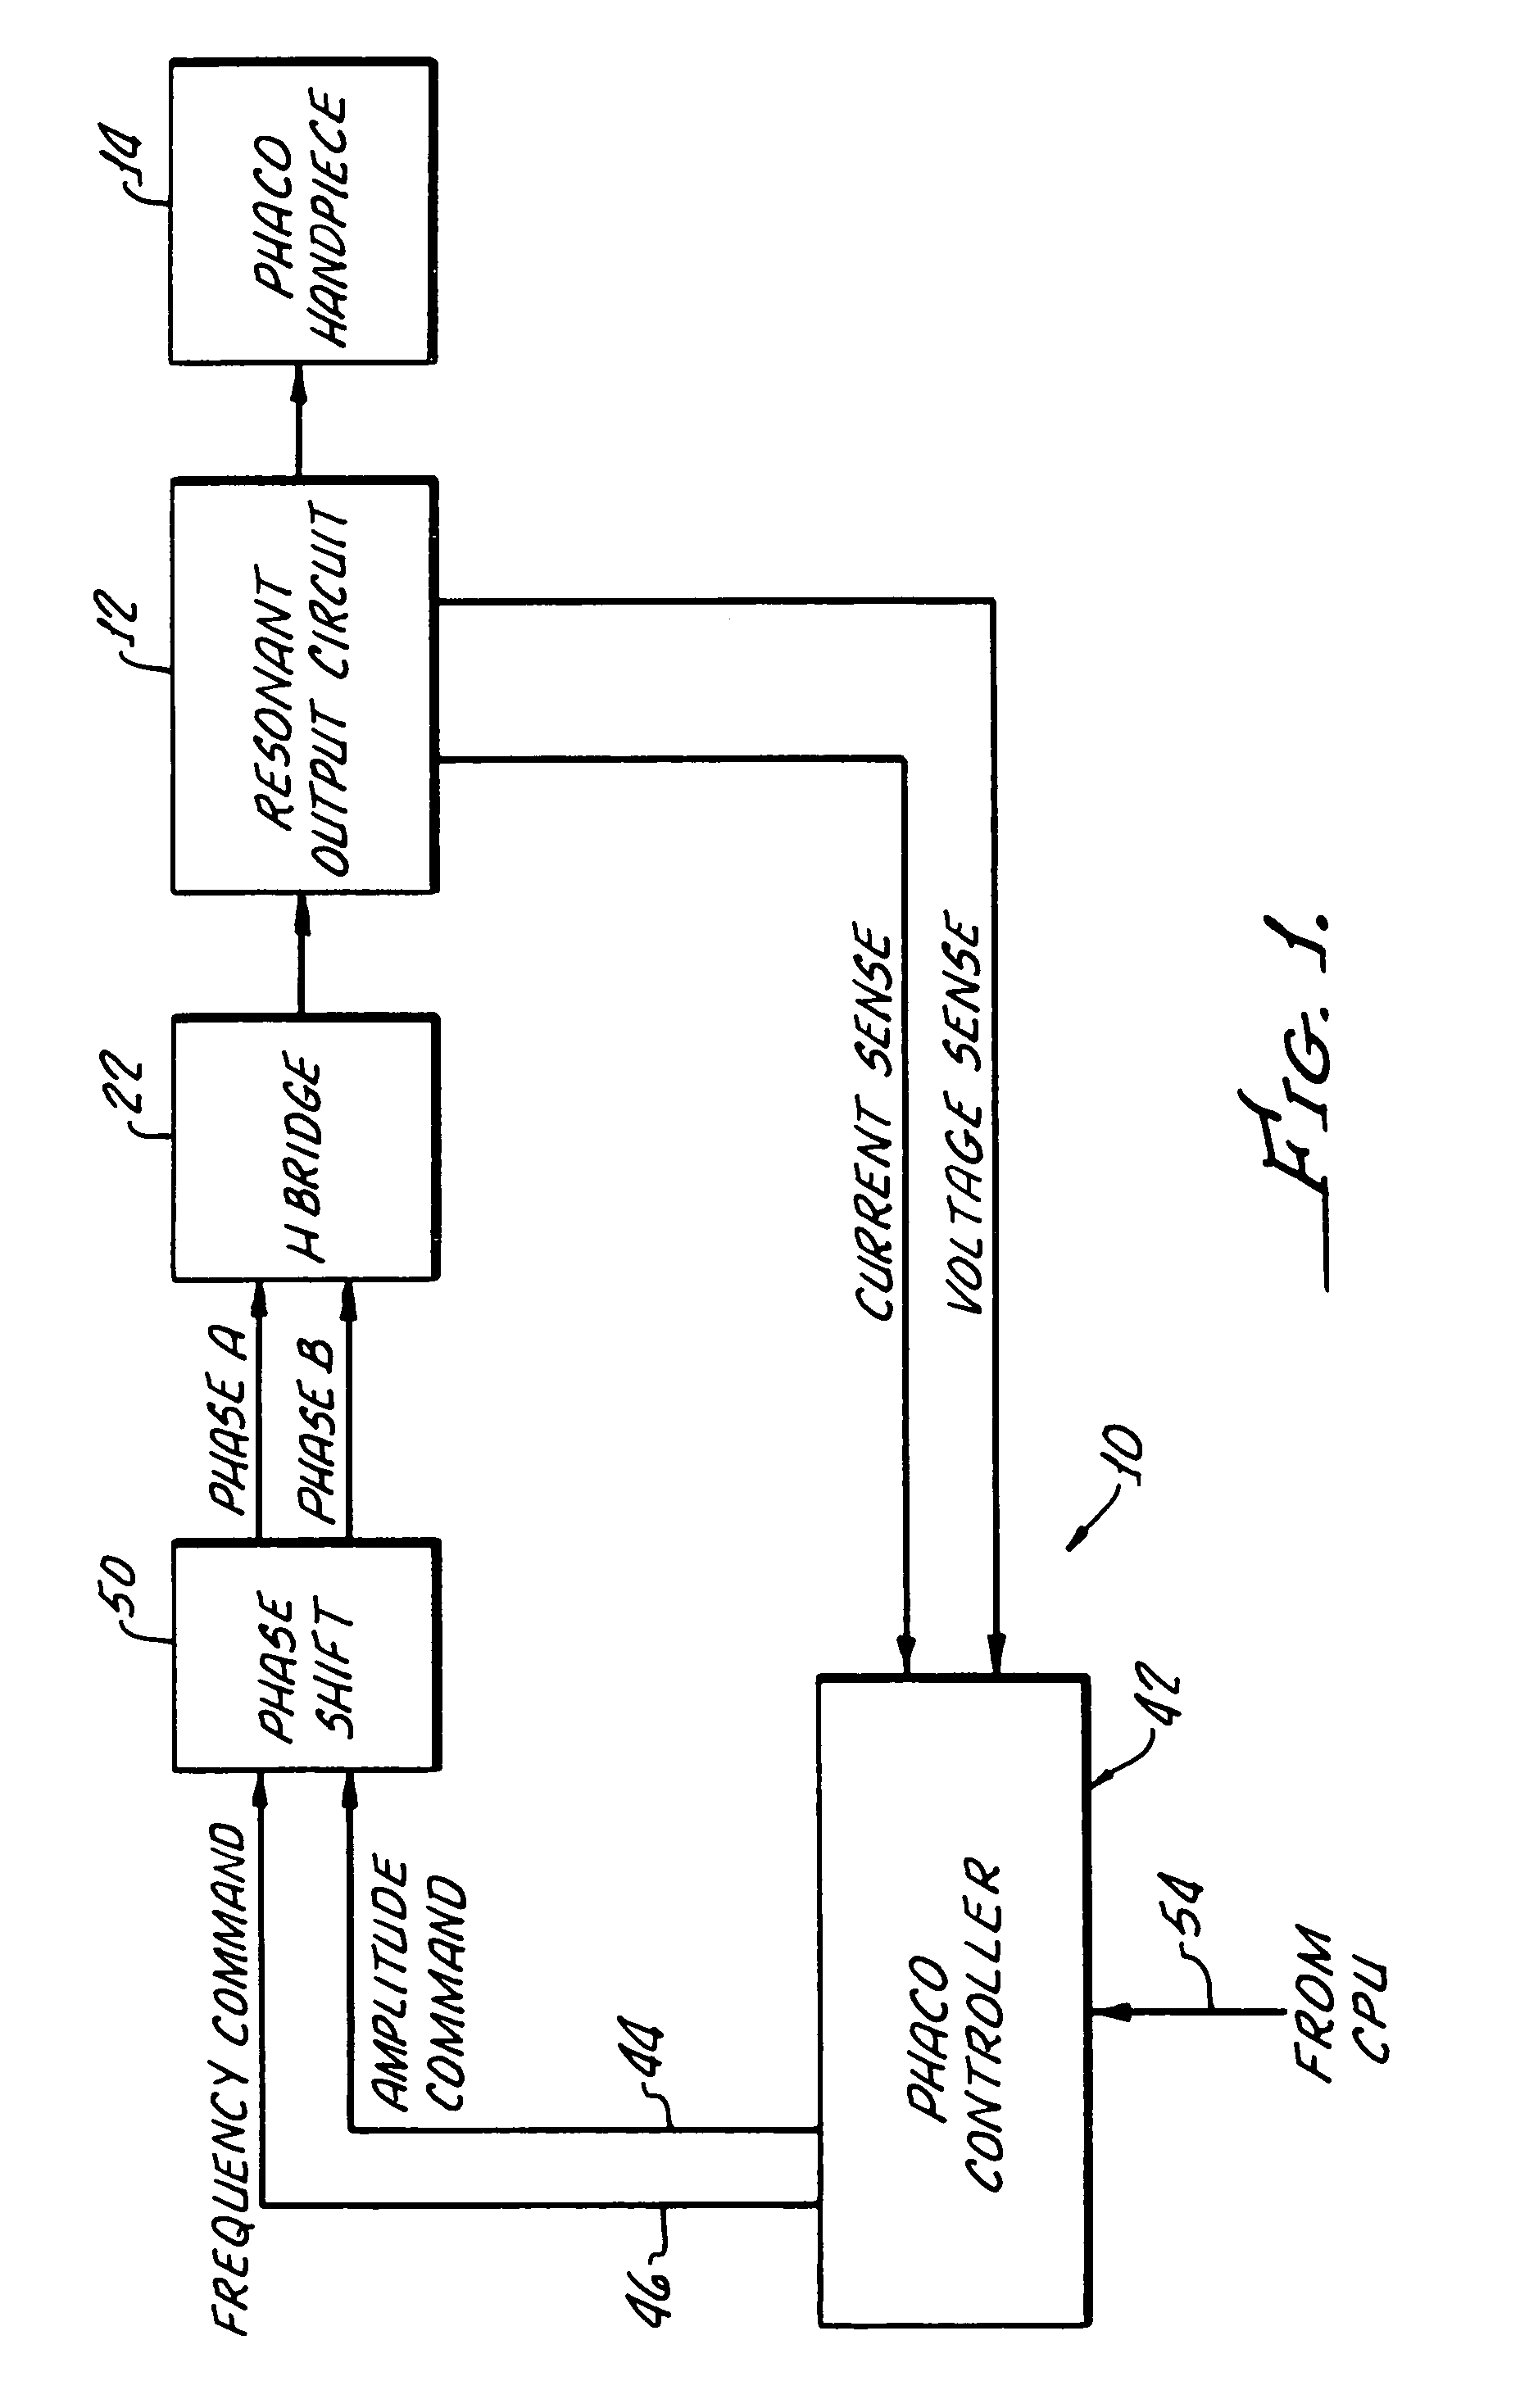 Resonant converter tuning for maintaining substantially constant phaco handpiece power under increased load